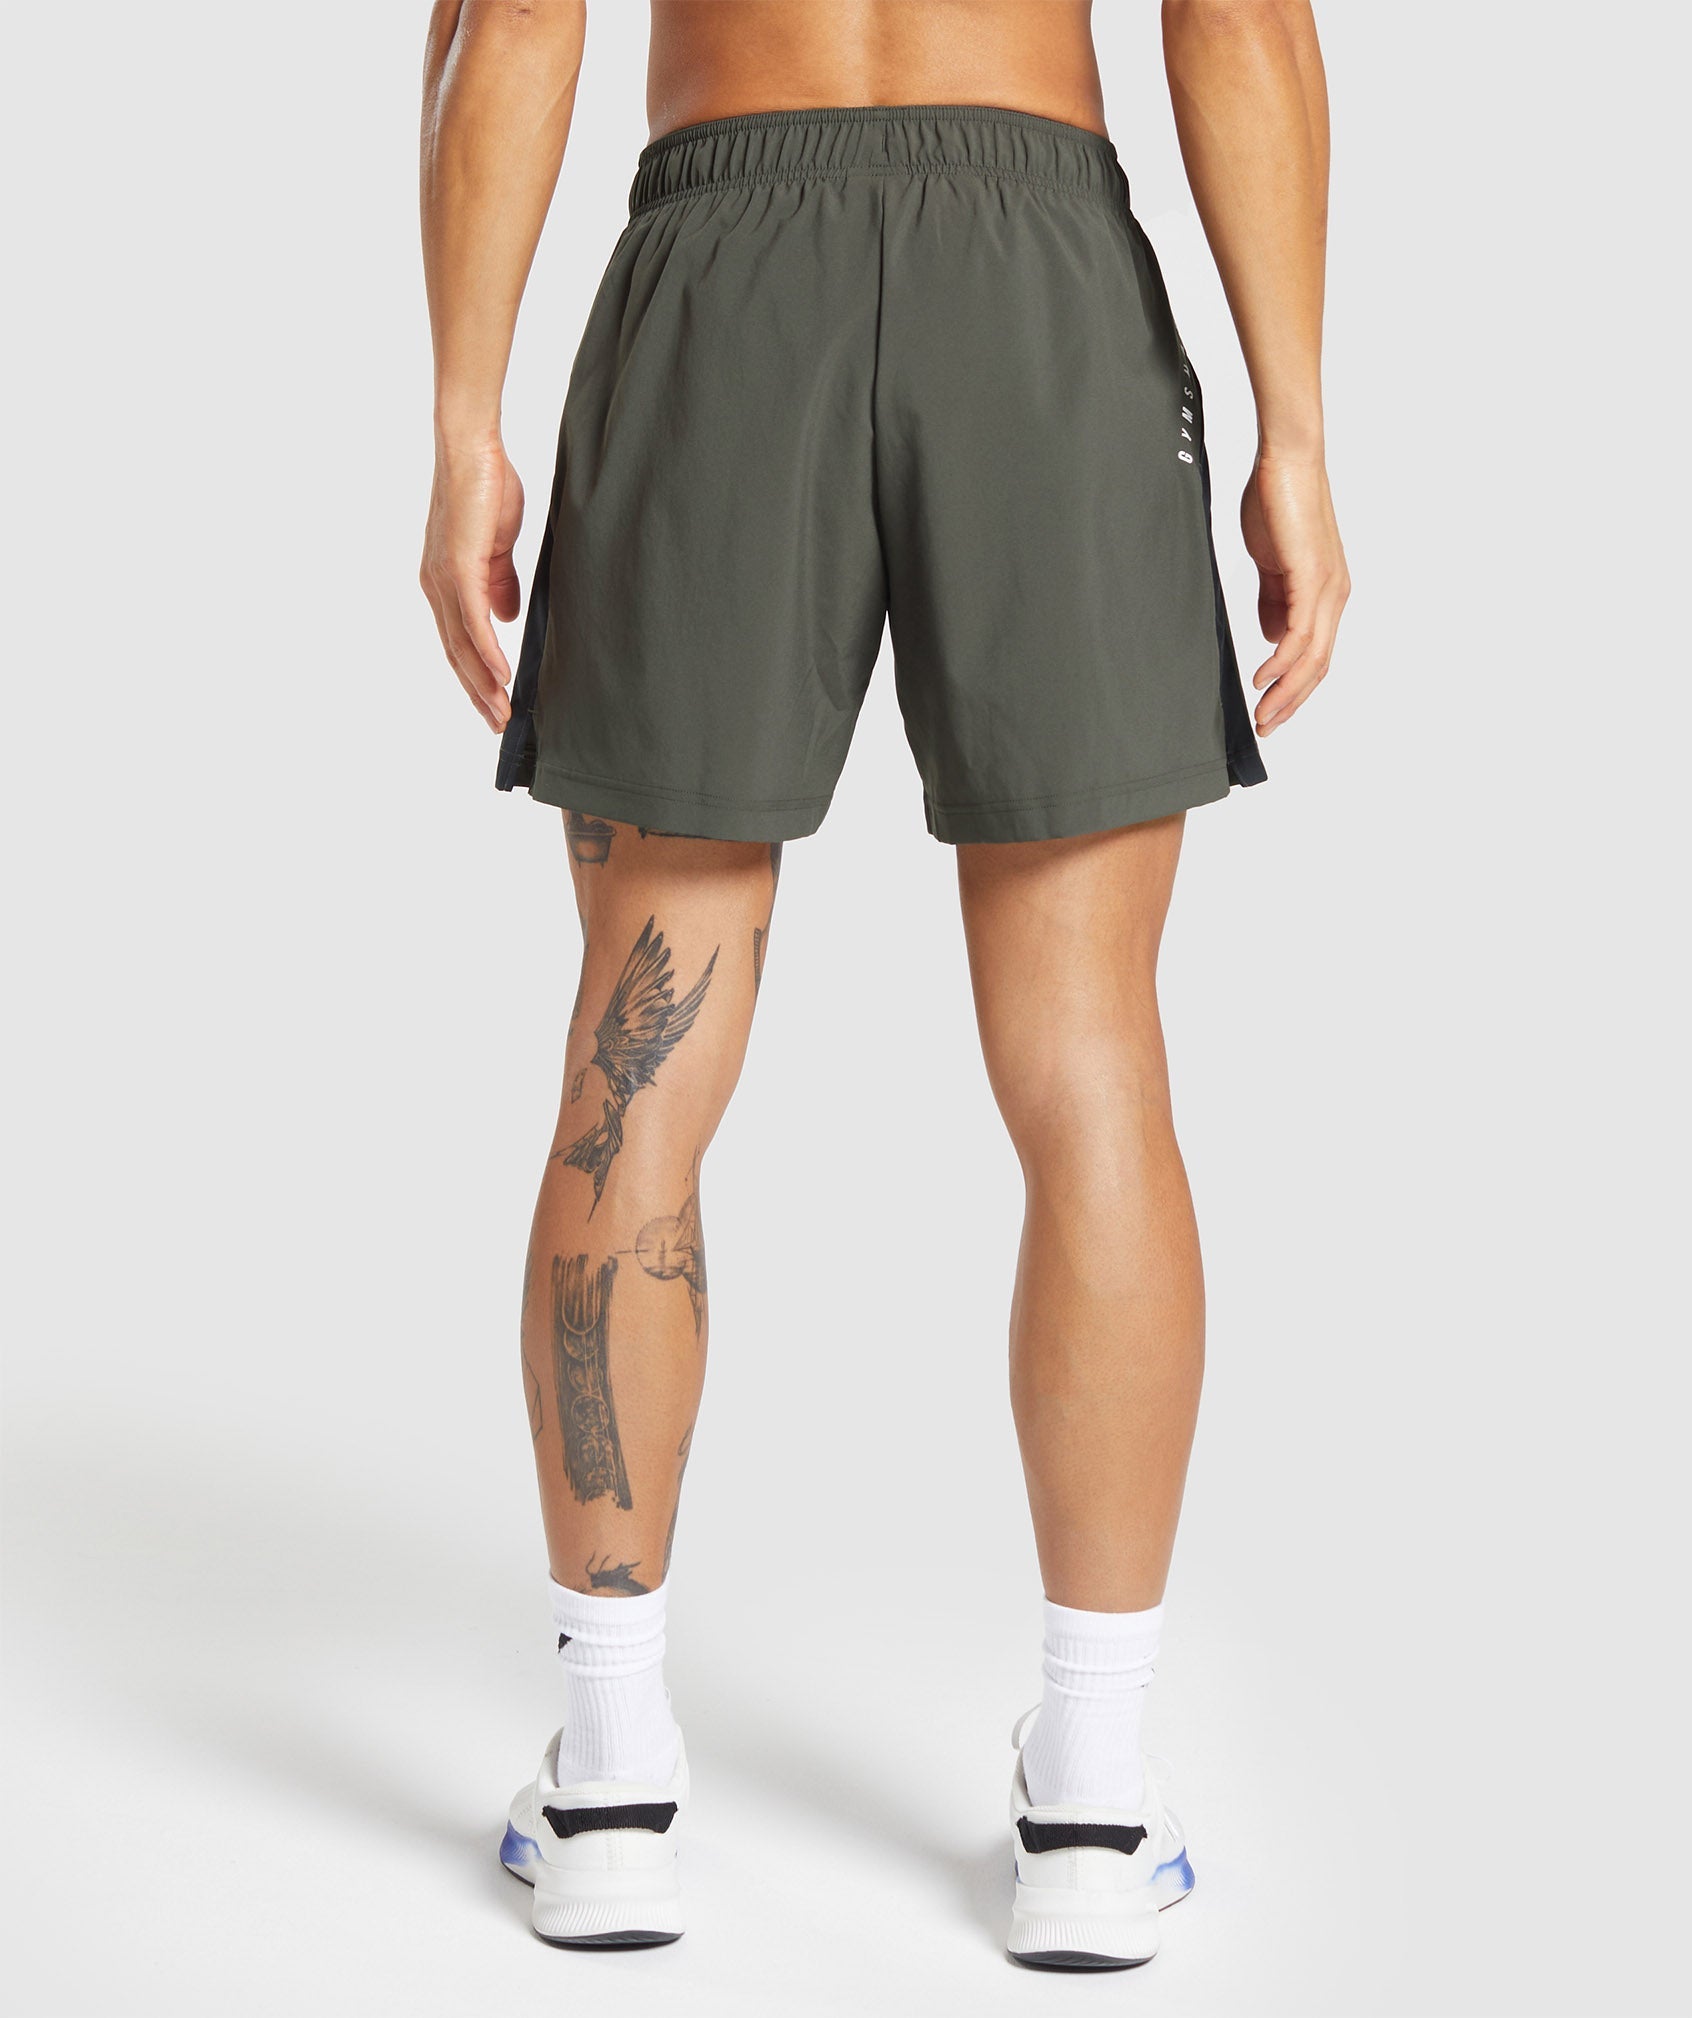 Sport 7" Shorts in Strength Green/Black - view 2